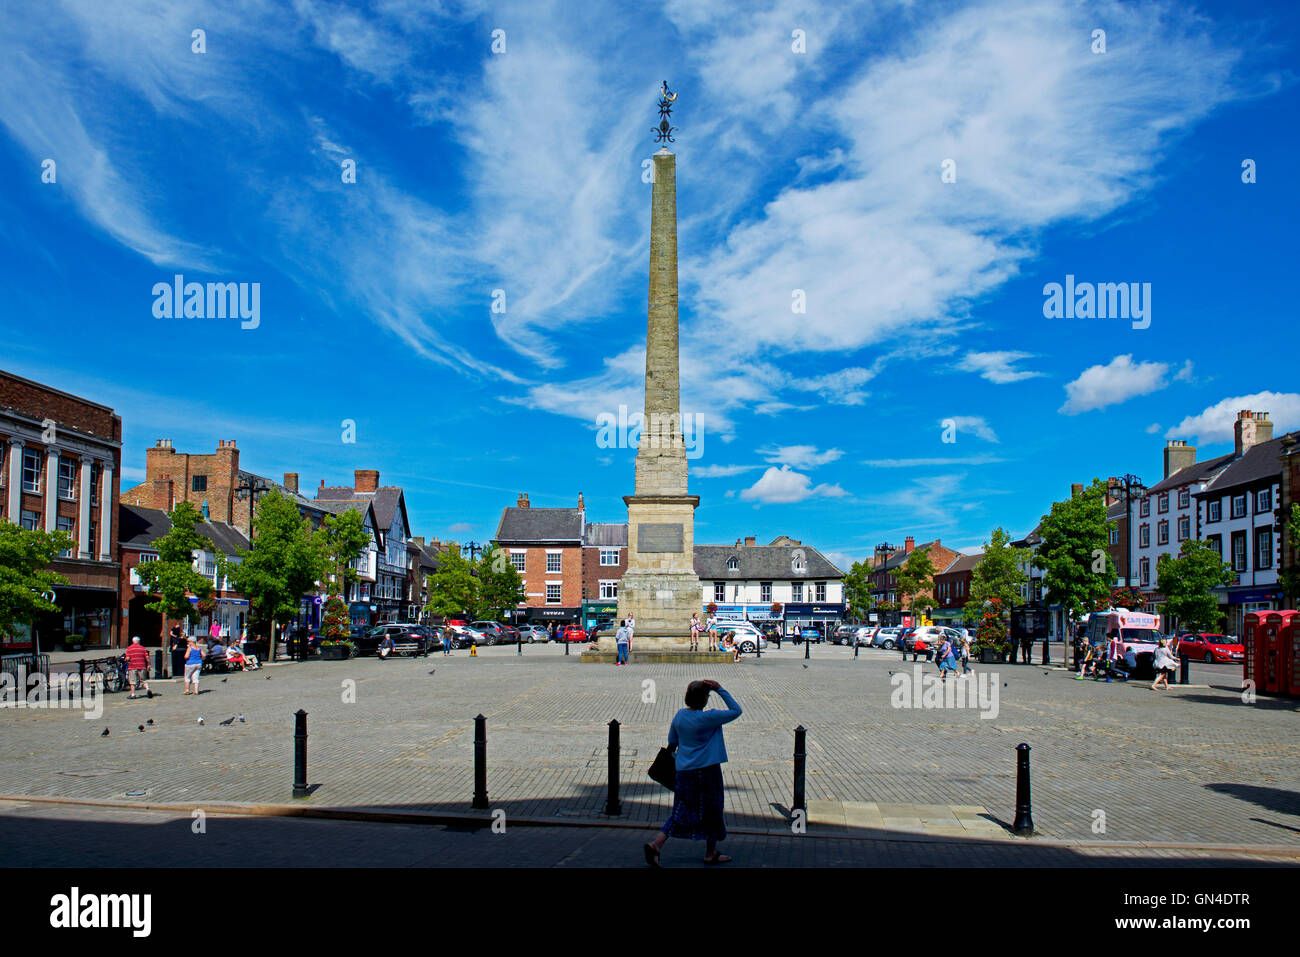 The obelisk in the market square, Ripon, North Yorkshire, England UK Stock Photo